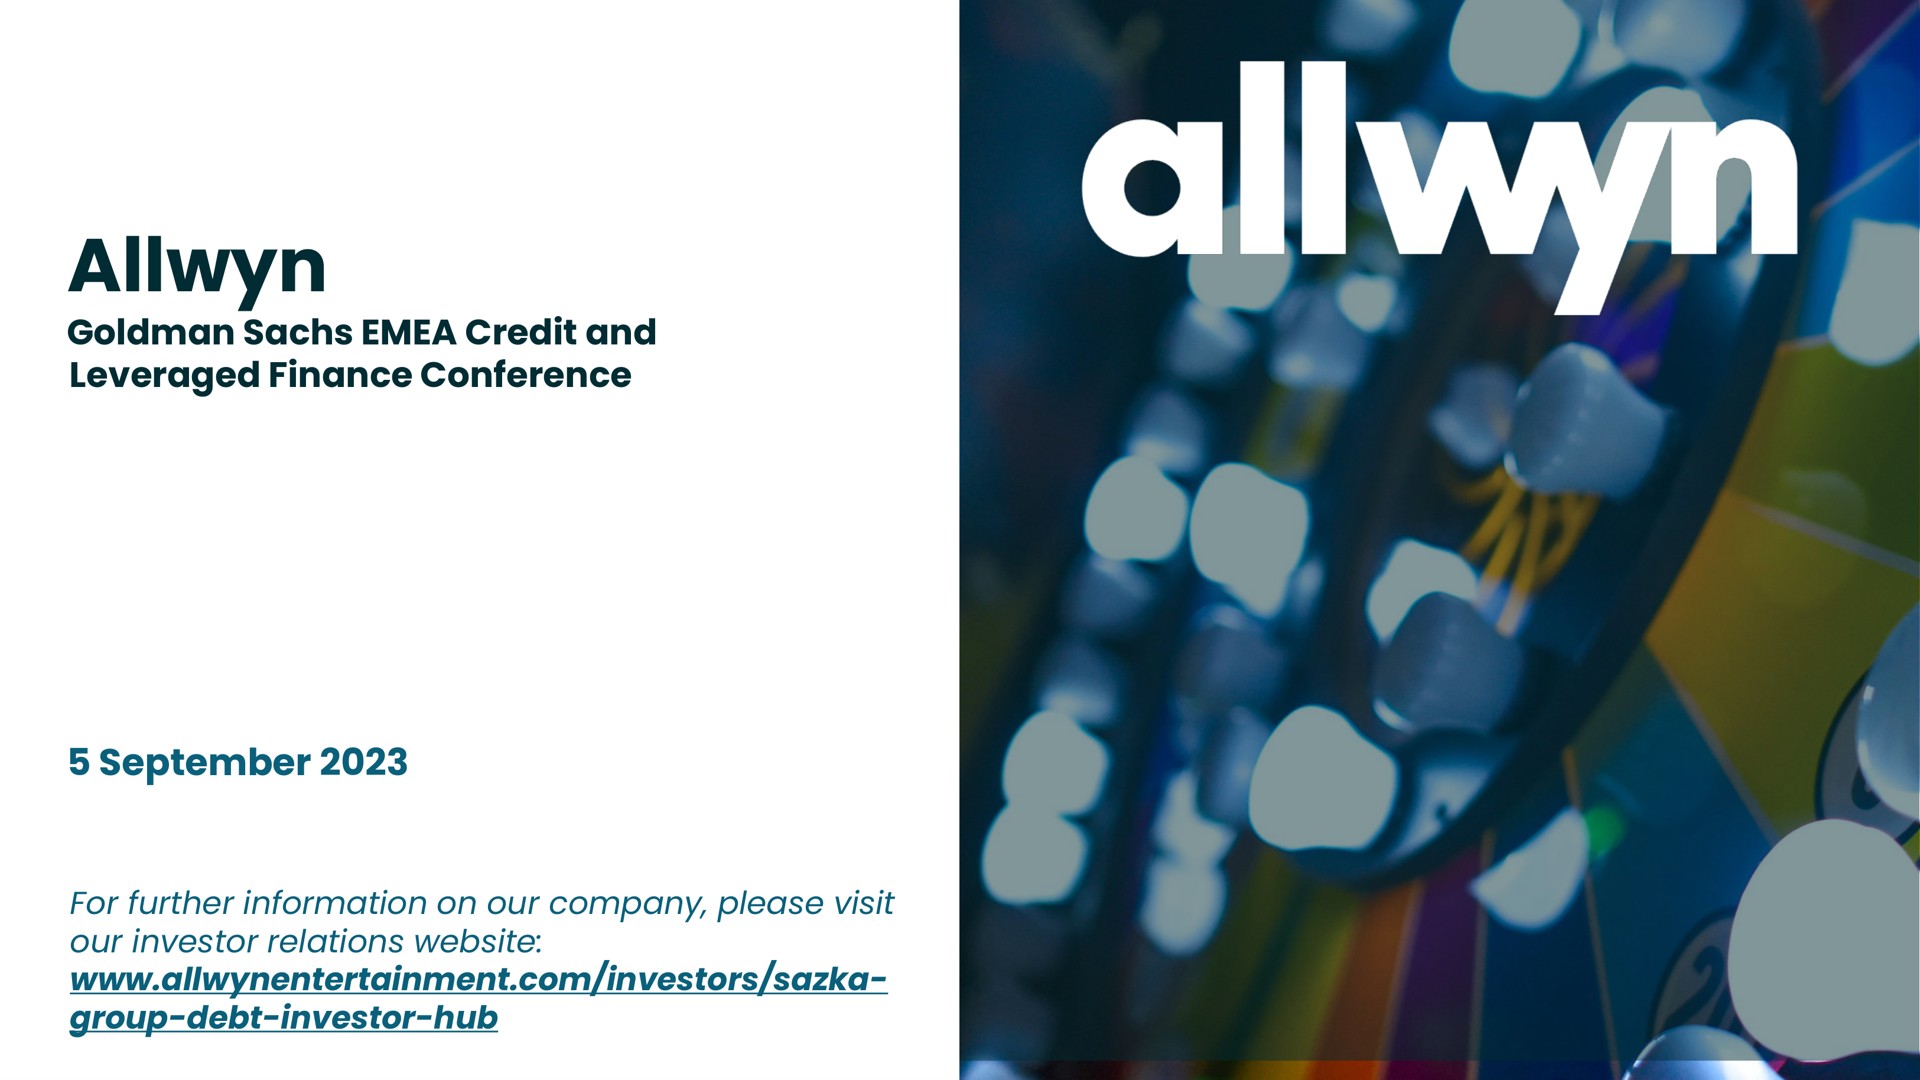 credit and leveraged finance conference | Allwyn